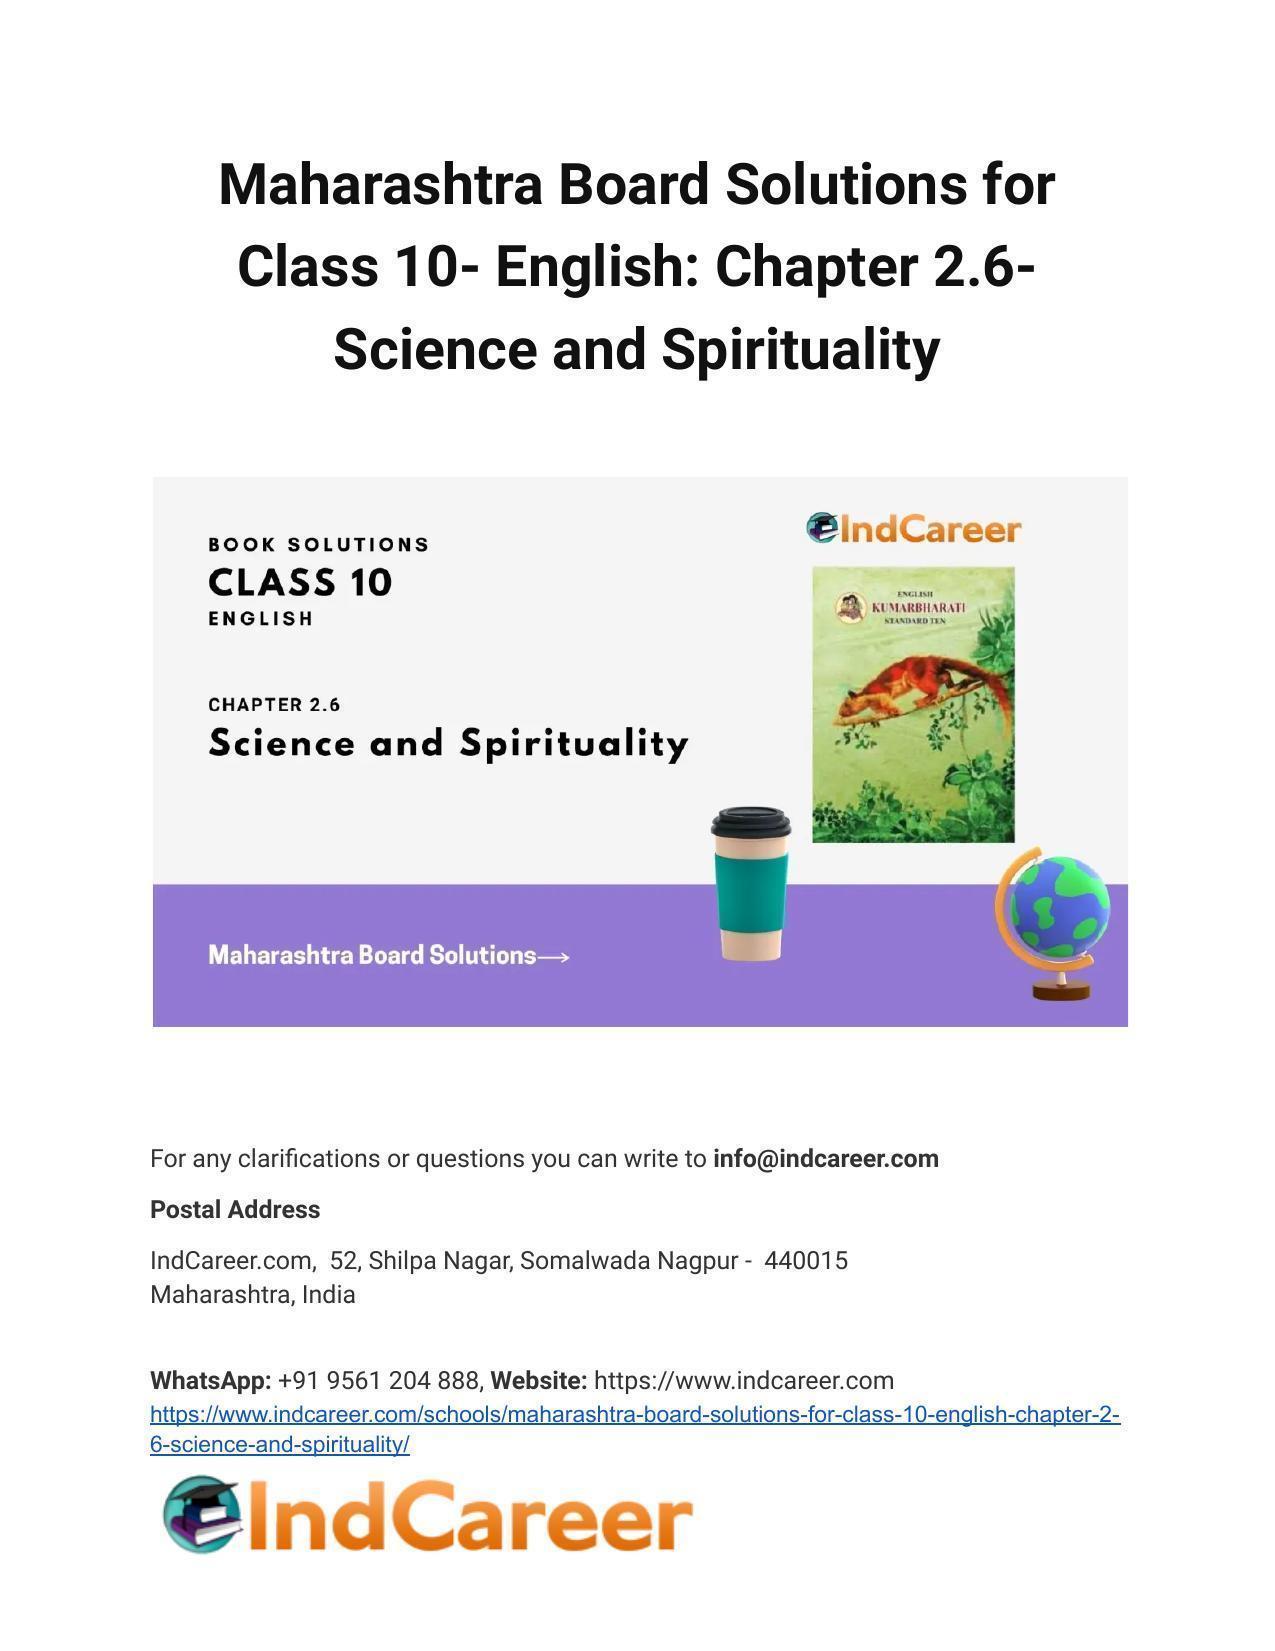 maharashtra-board-solutions-for-class-10-english-chapter-2-6-science-and-spirituality